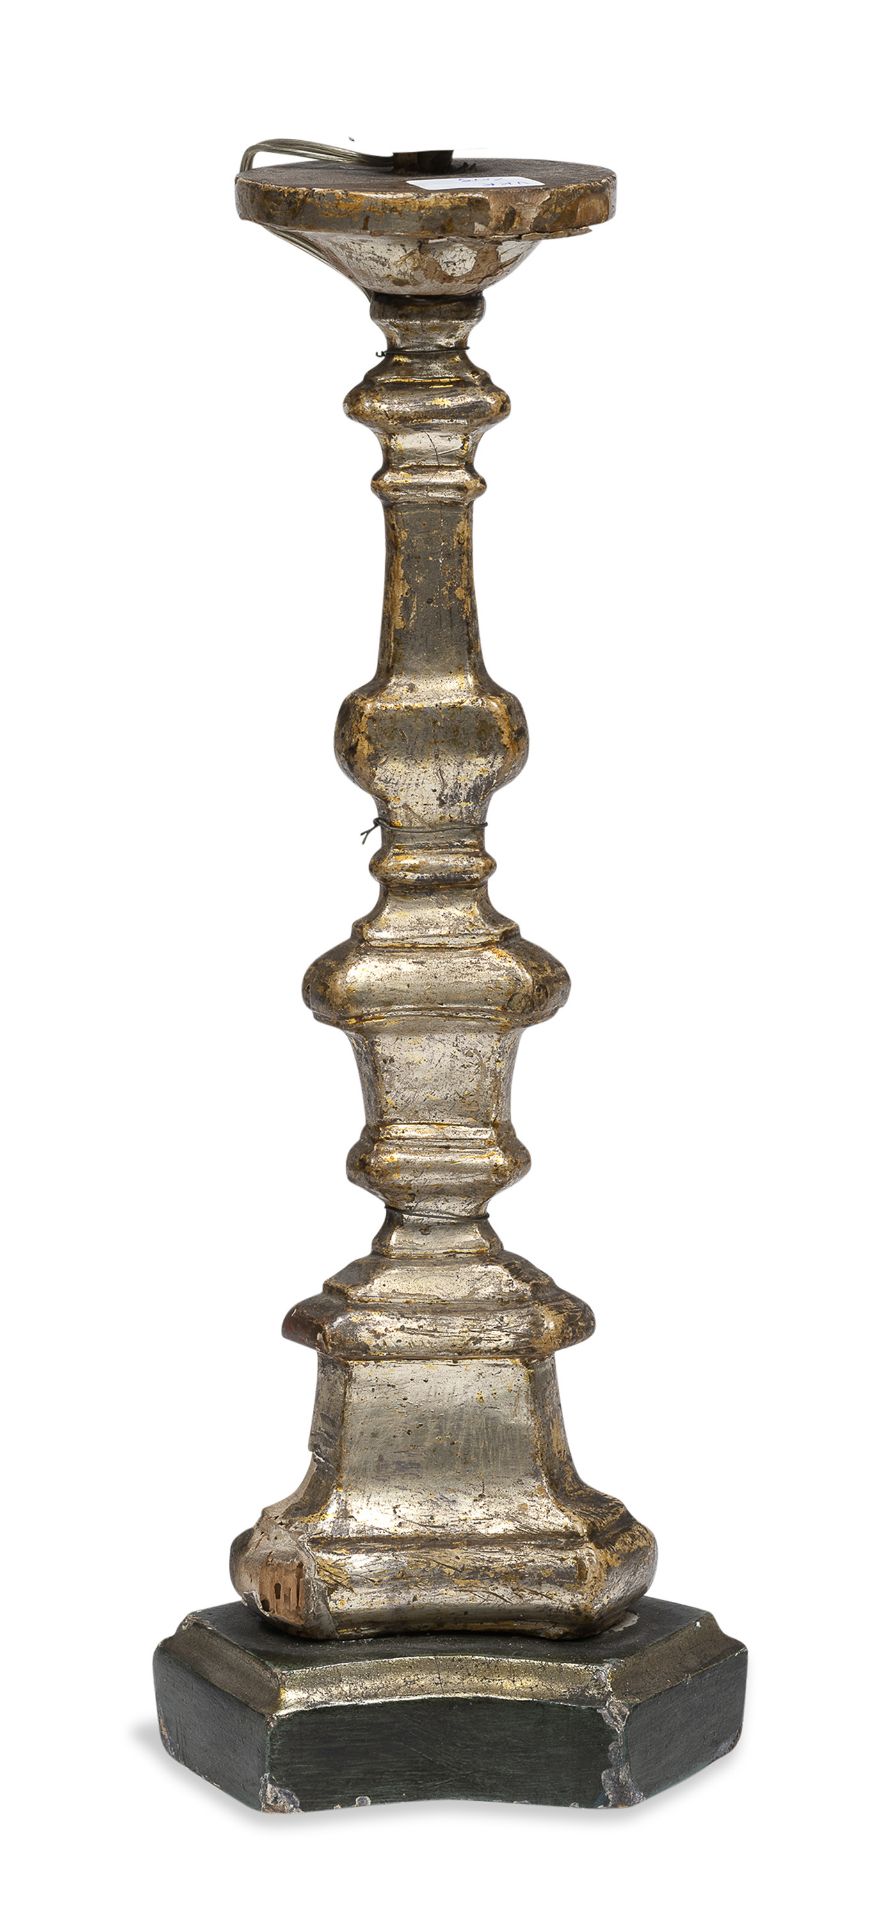 CANDLESTICK IN GILTWOOD 18th CENTURY